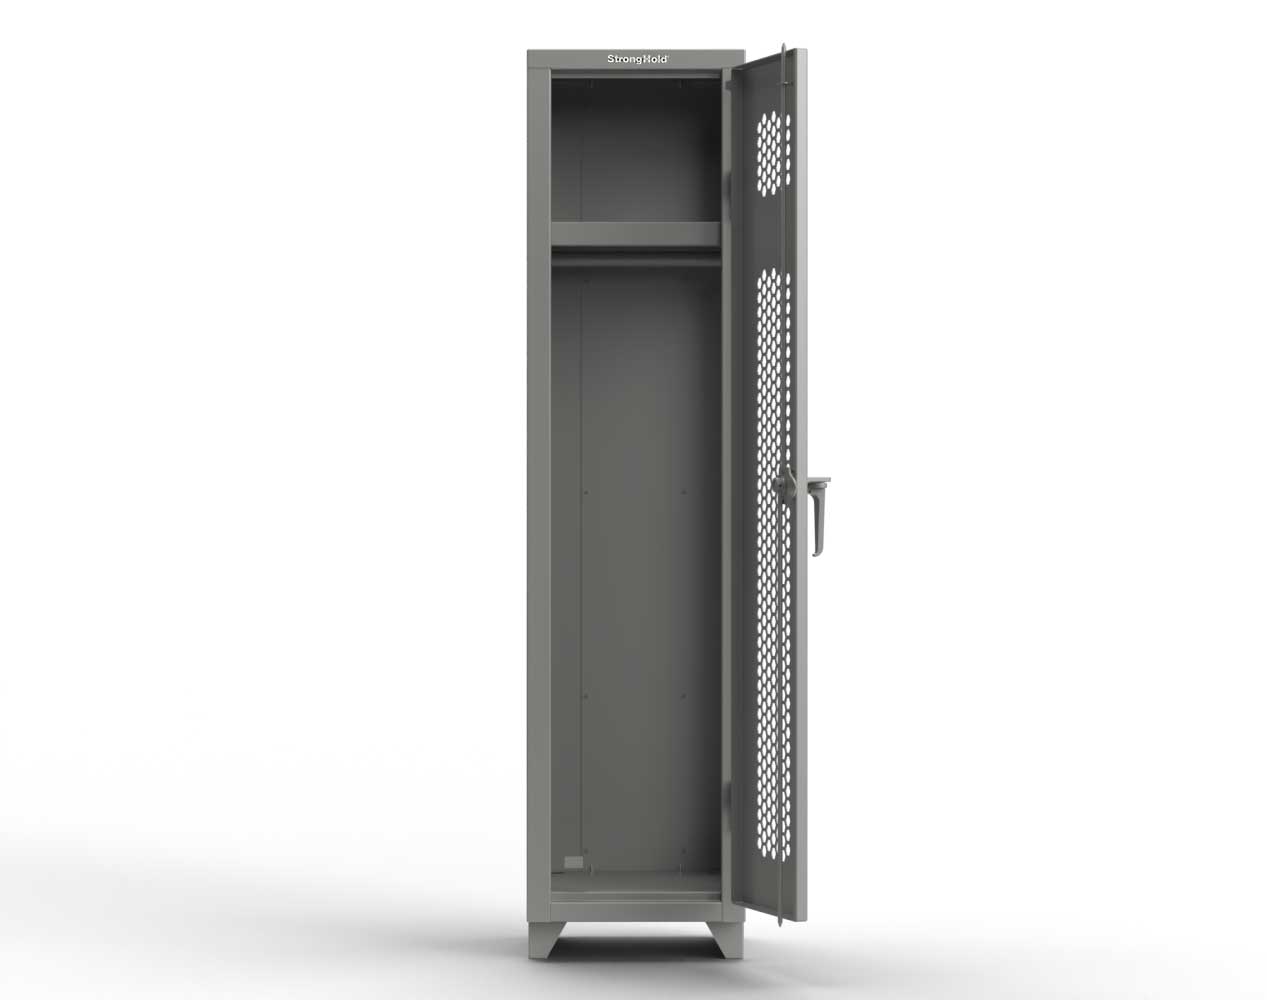 Extra Heavy Duty 14 GA Ventilated Single-Tier Locker with Shelf and Hanger Rod, 1 Compartment - 18 in. W x 18 in. D x 75 in. H